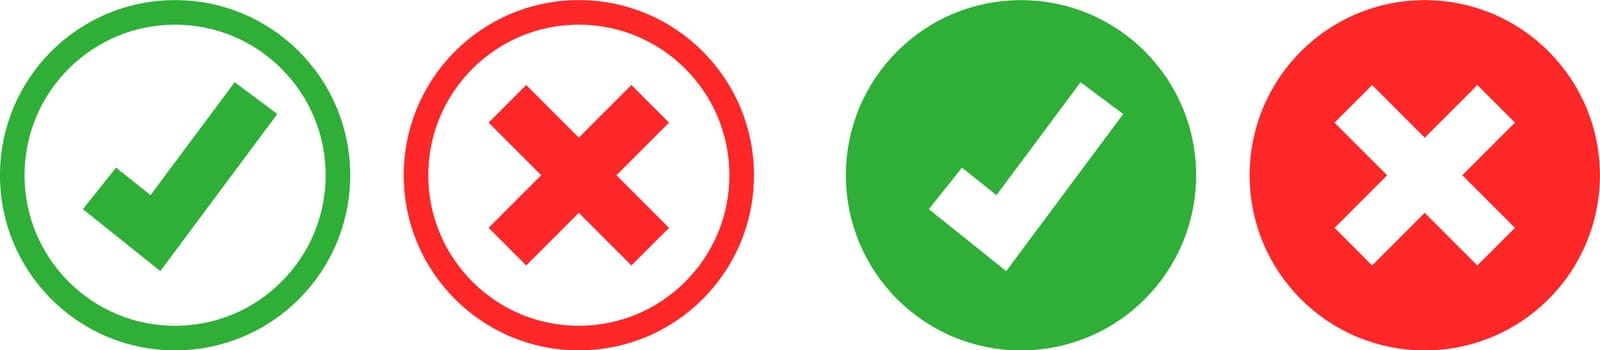 Set green approval check mark and red cross icons in circle and square, checklist signs